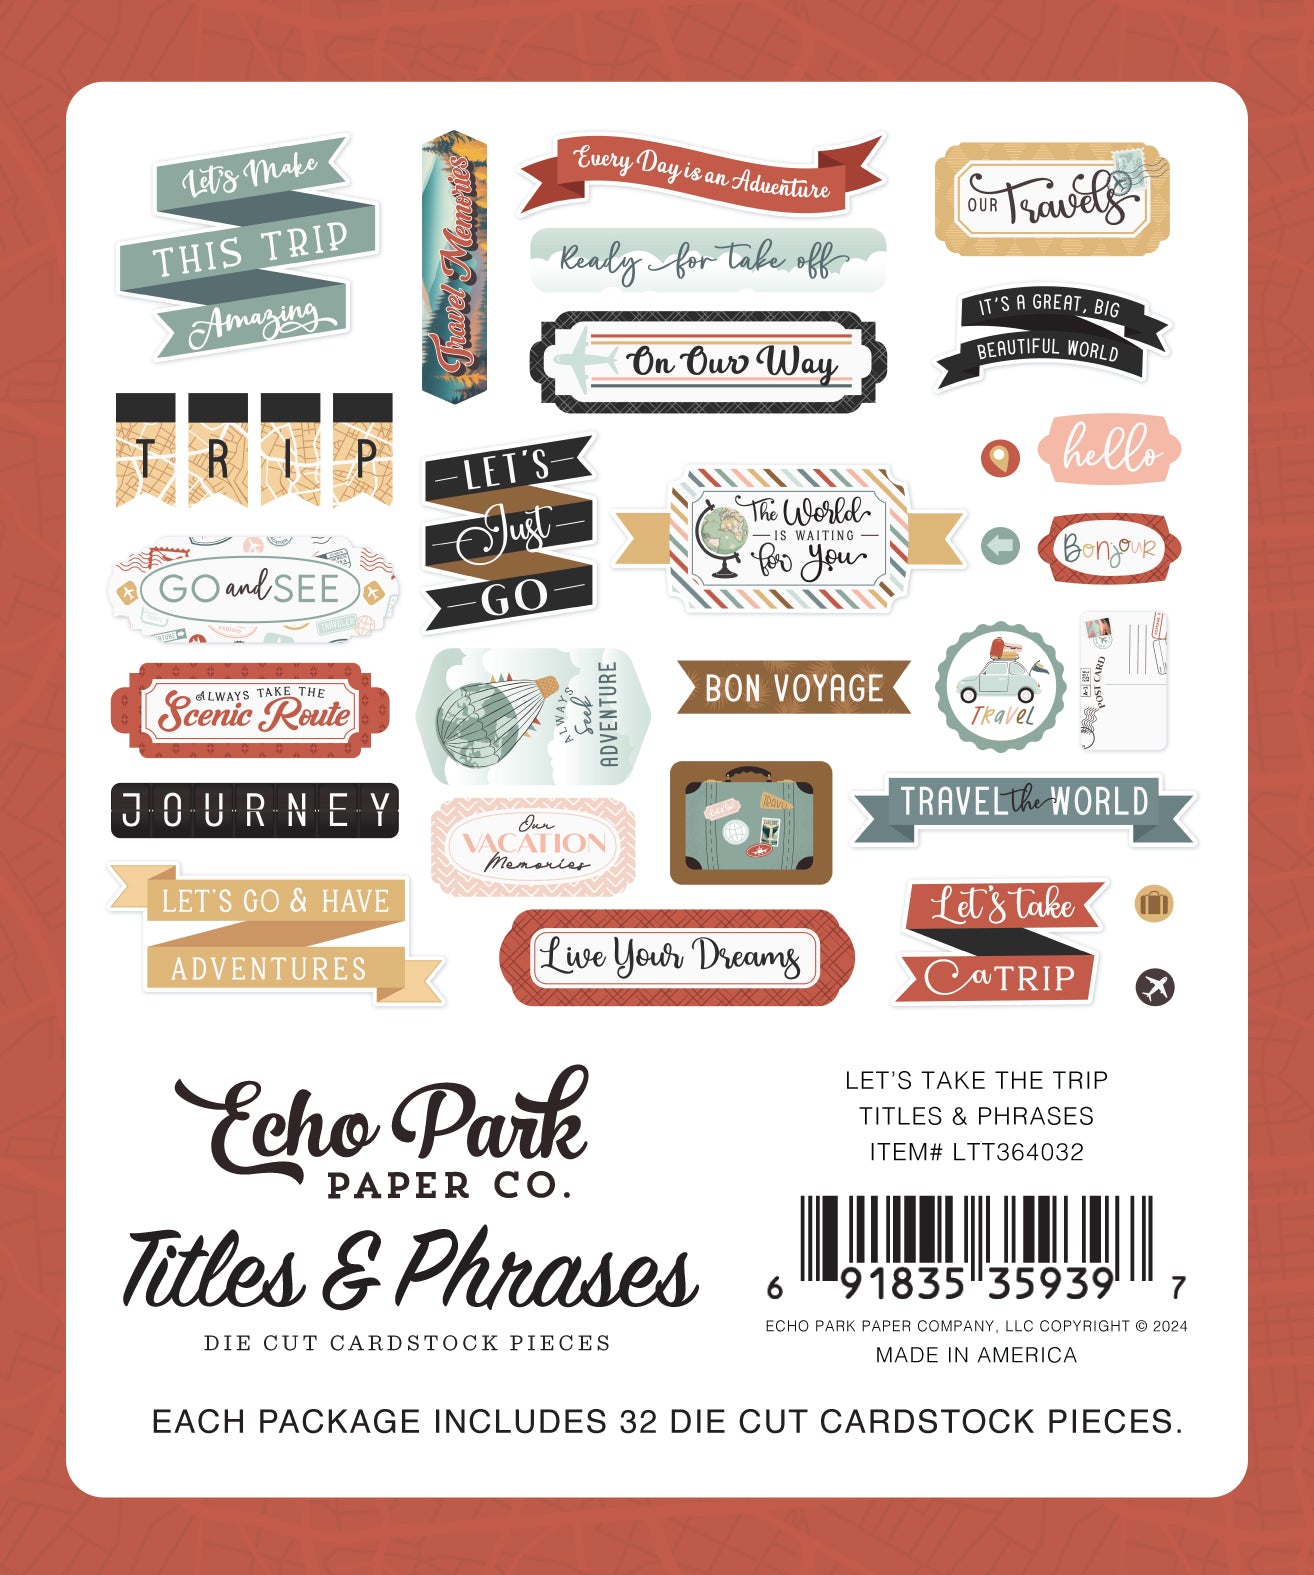 Let's Take the Trip Collection 5x5 Scrapbook Titles & Phrases by Echo Park Paper